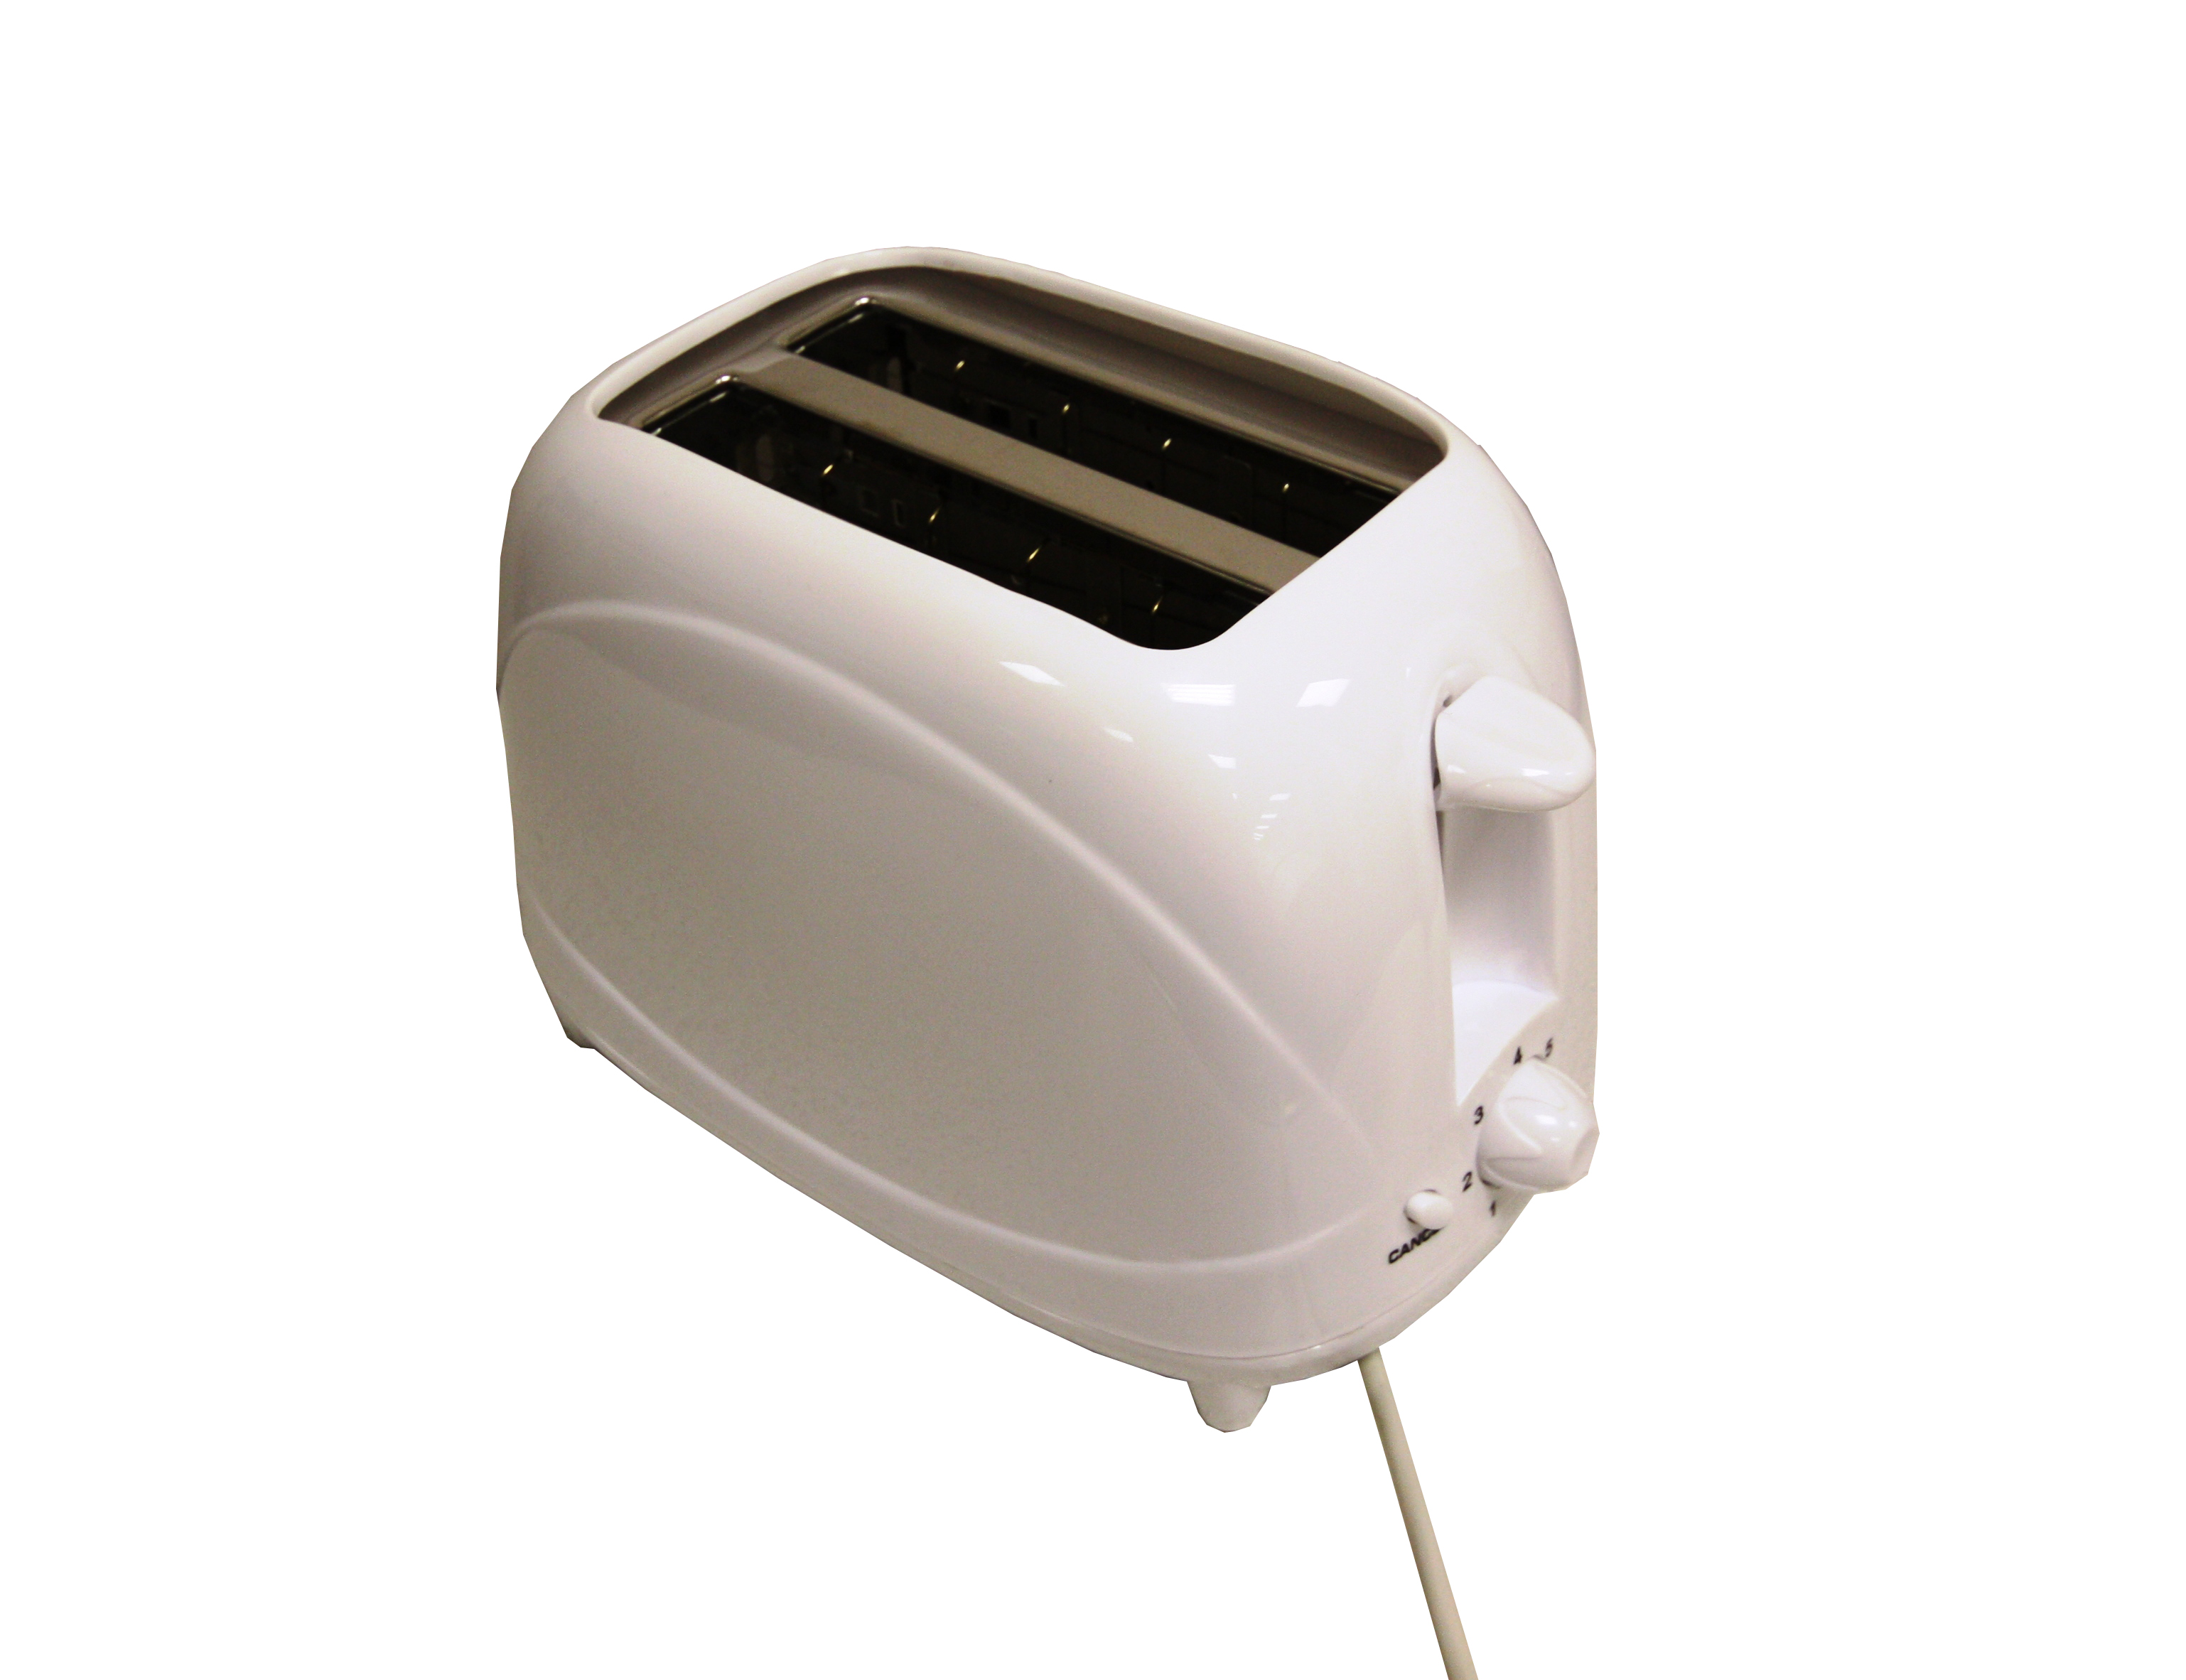 Sunncamp Low Wattage Toaster - White